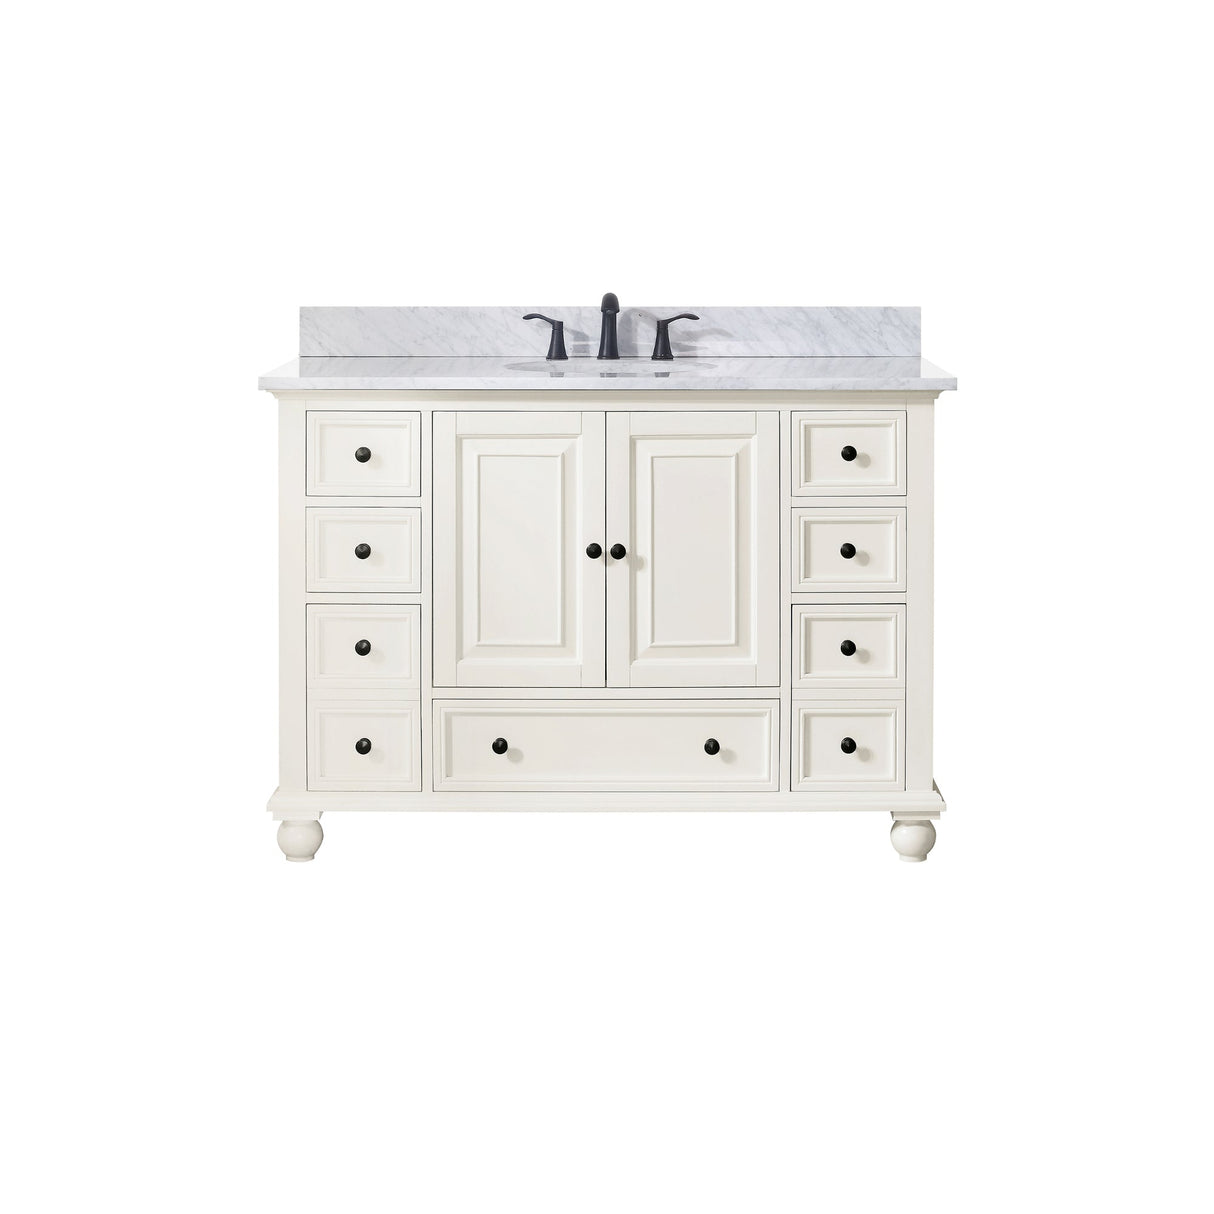 Avanity Thompson 49 in. Vanity in French White finish with Carrara White Marble Top